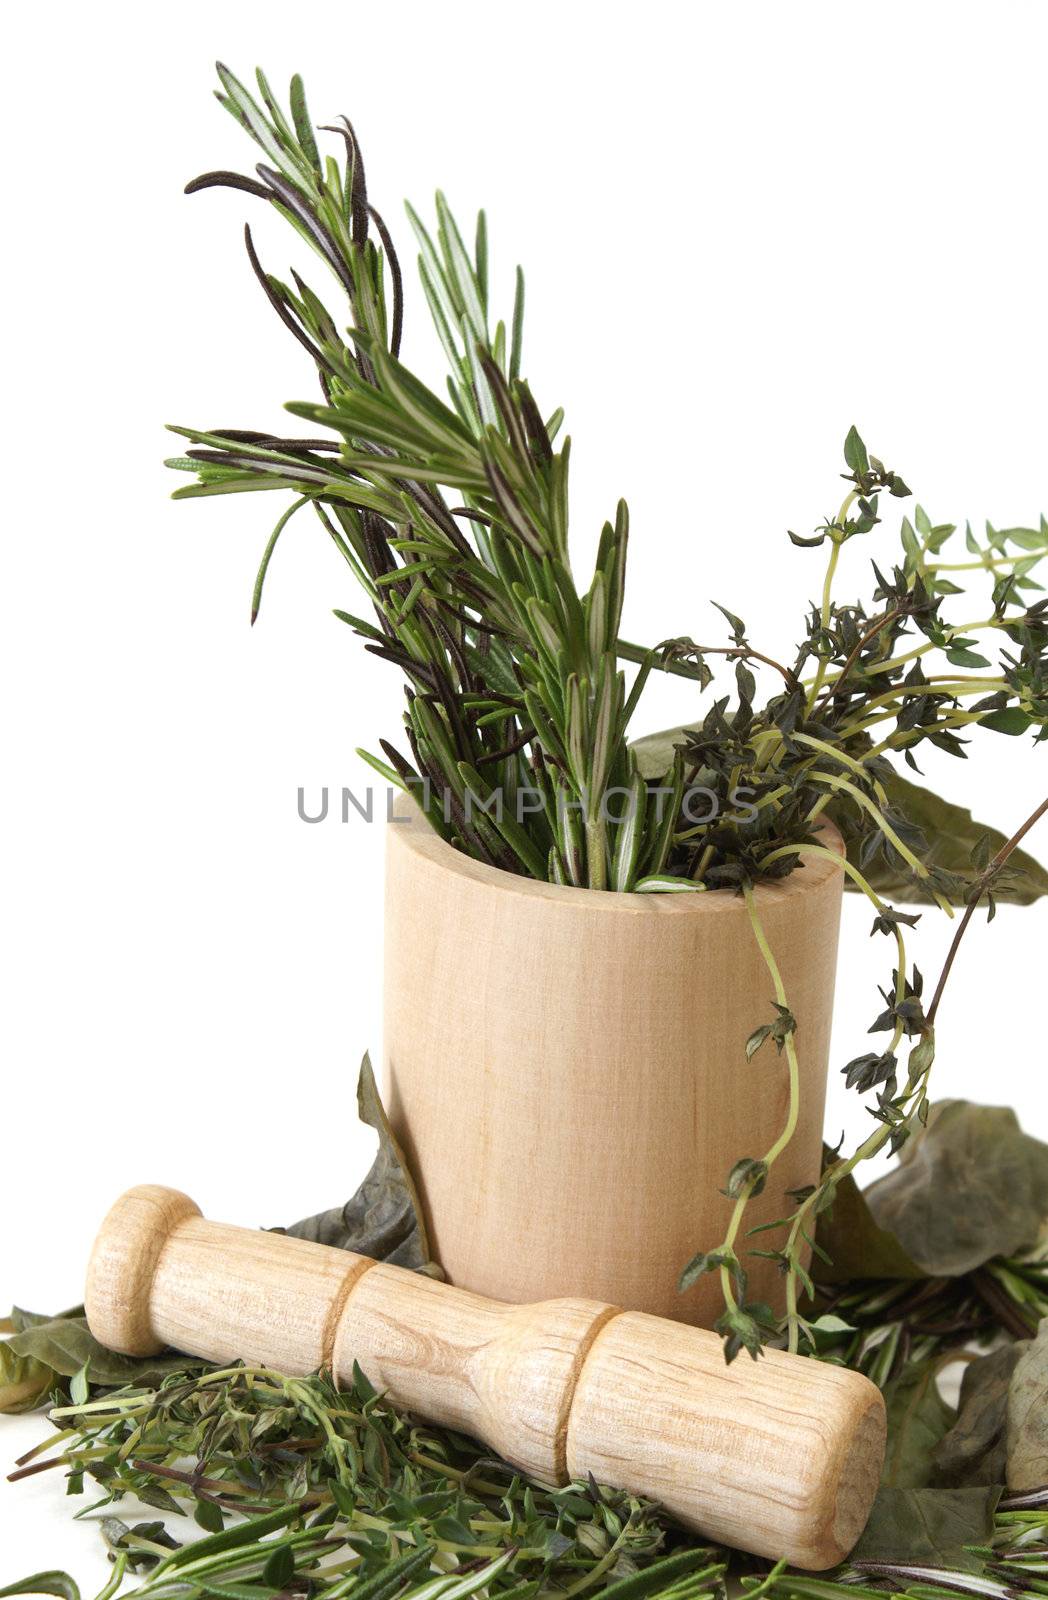 Preparing herbs in a mortar and pestle.